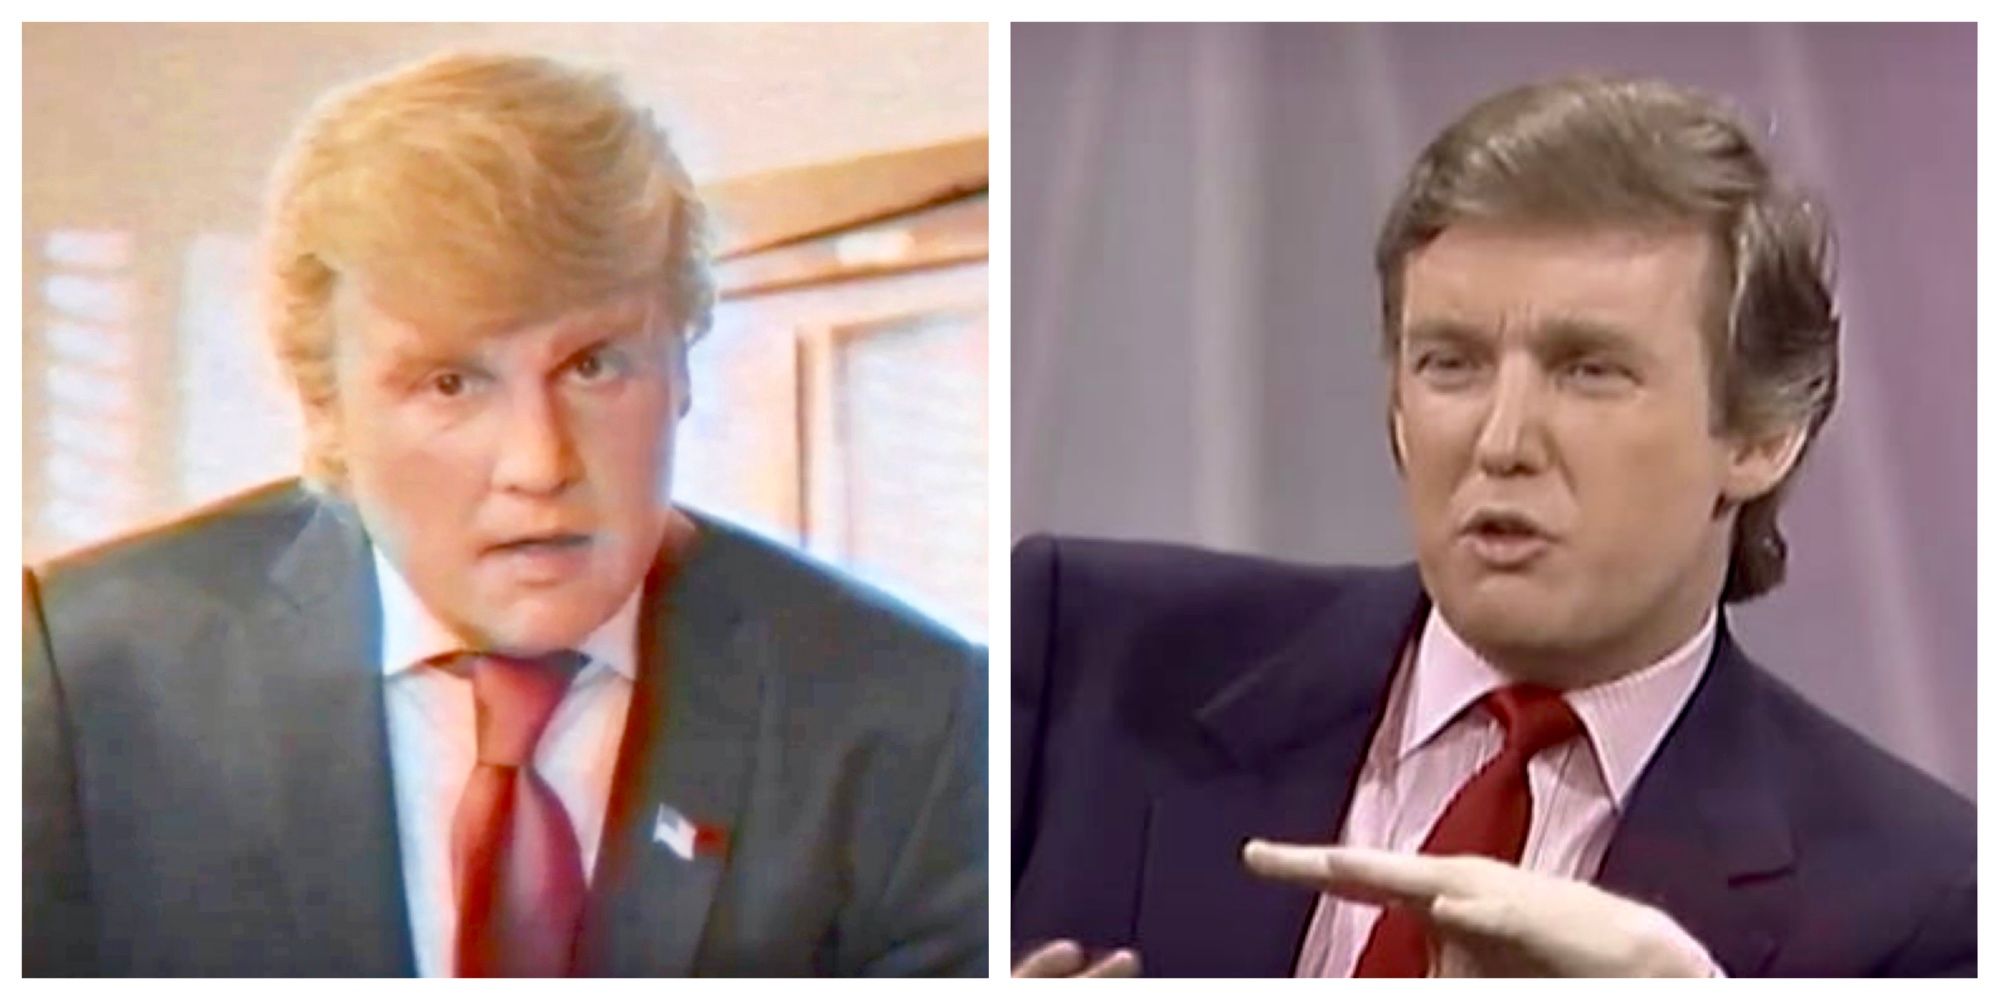 Johnny Depp as Donald Trump in The Art of the Deal: The Movie